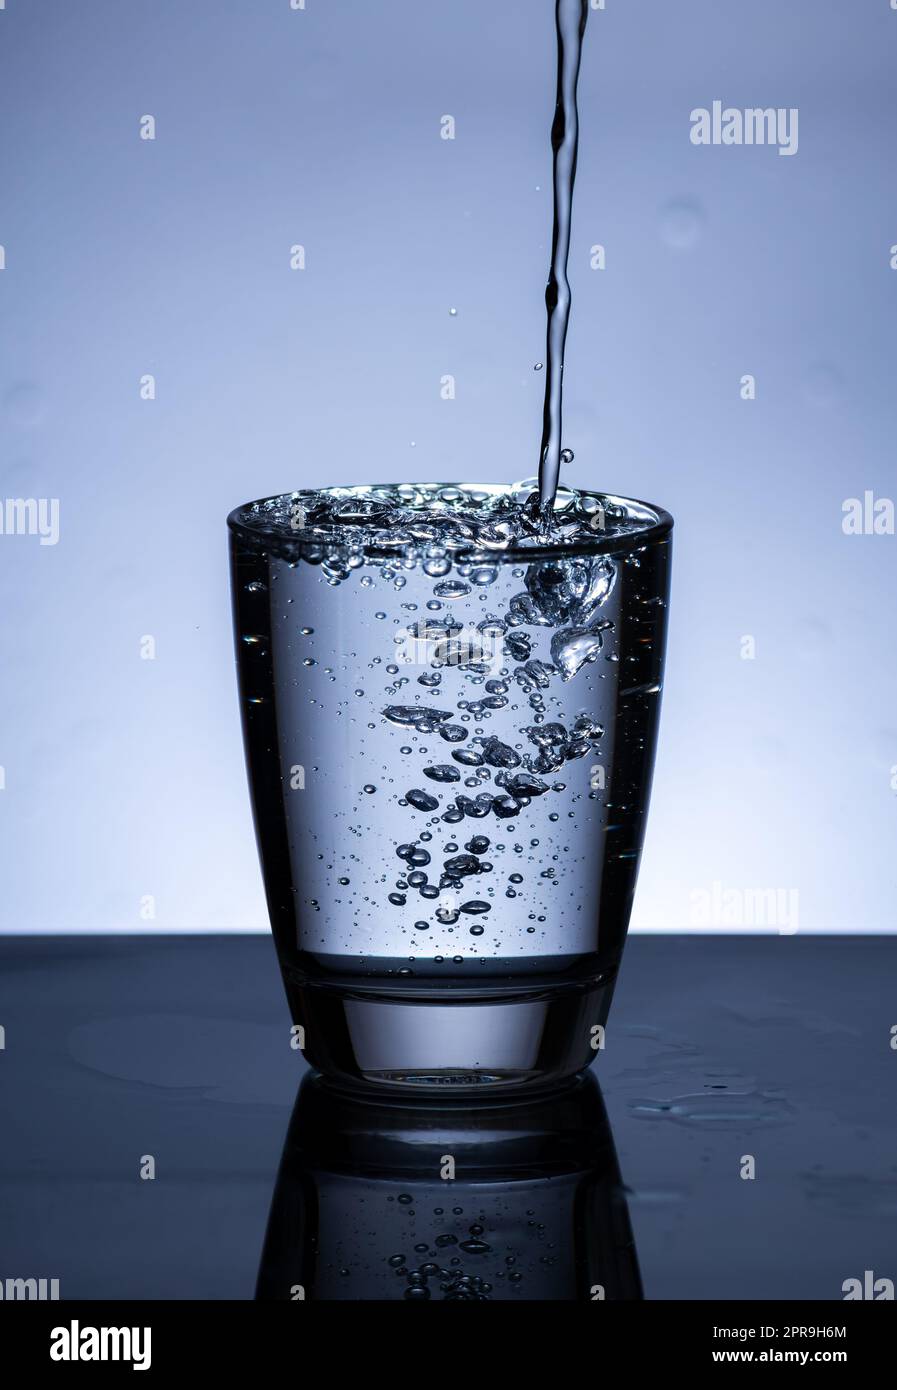 https://c8.alamy.com/comp/2PR9H6M/the-image-of-pouring-drinking-water-into-a-glass-2PR9H6M.jpg